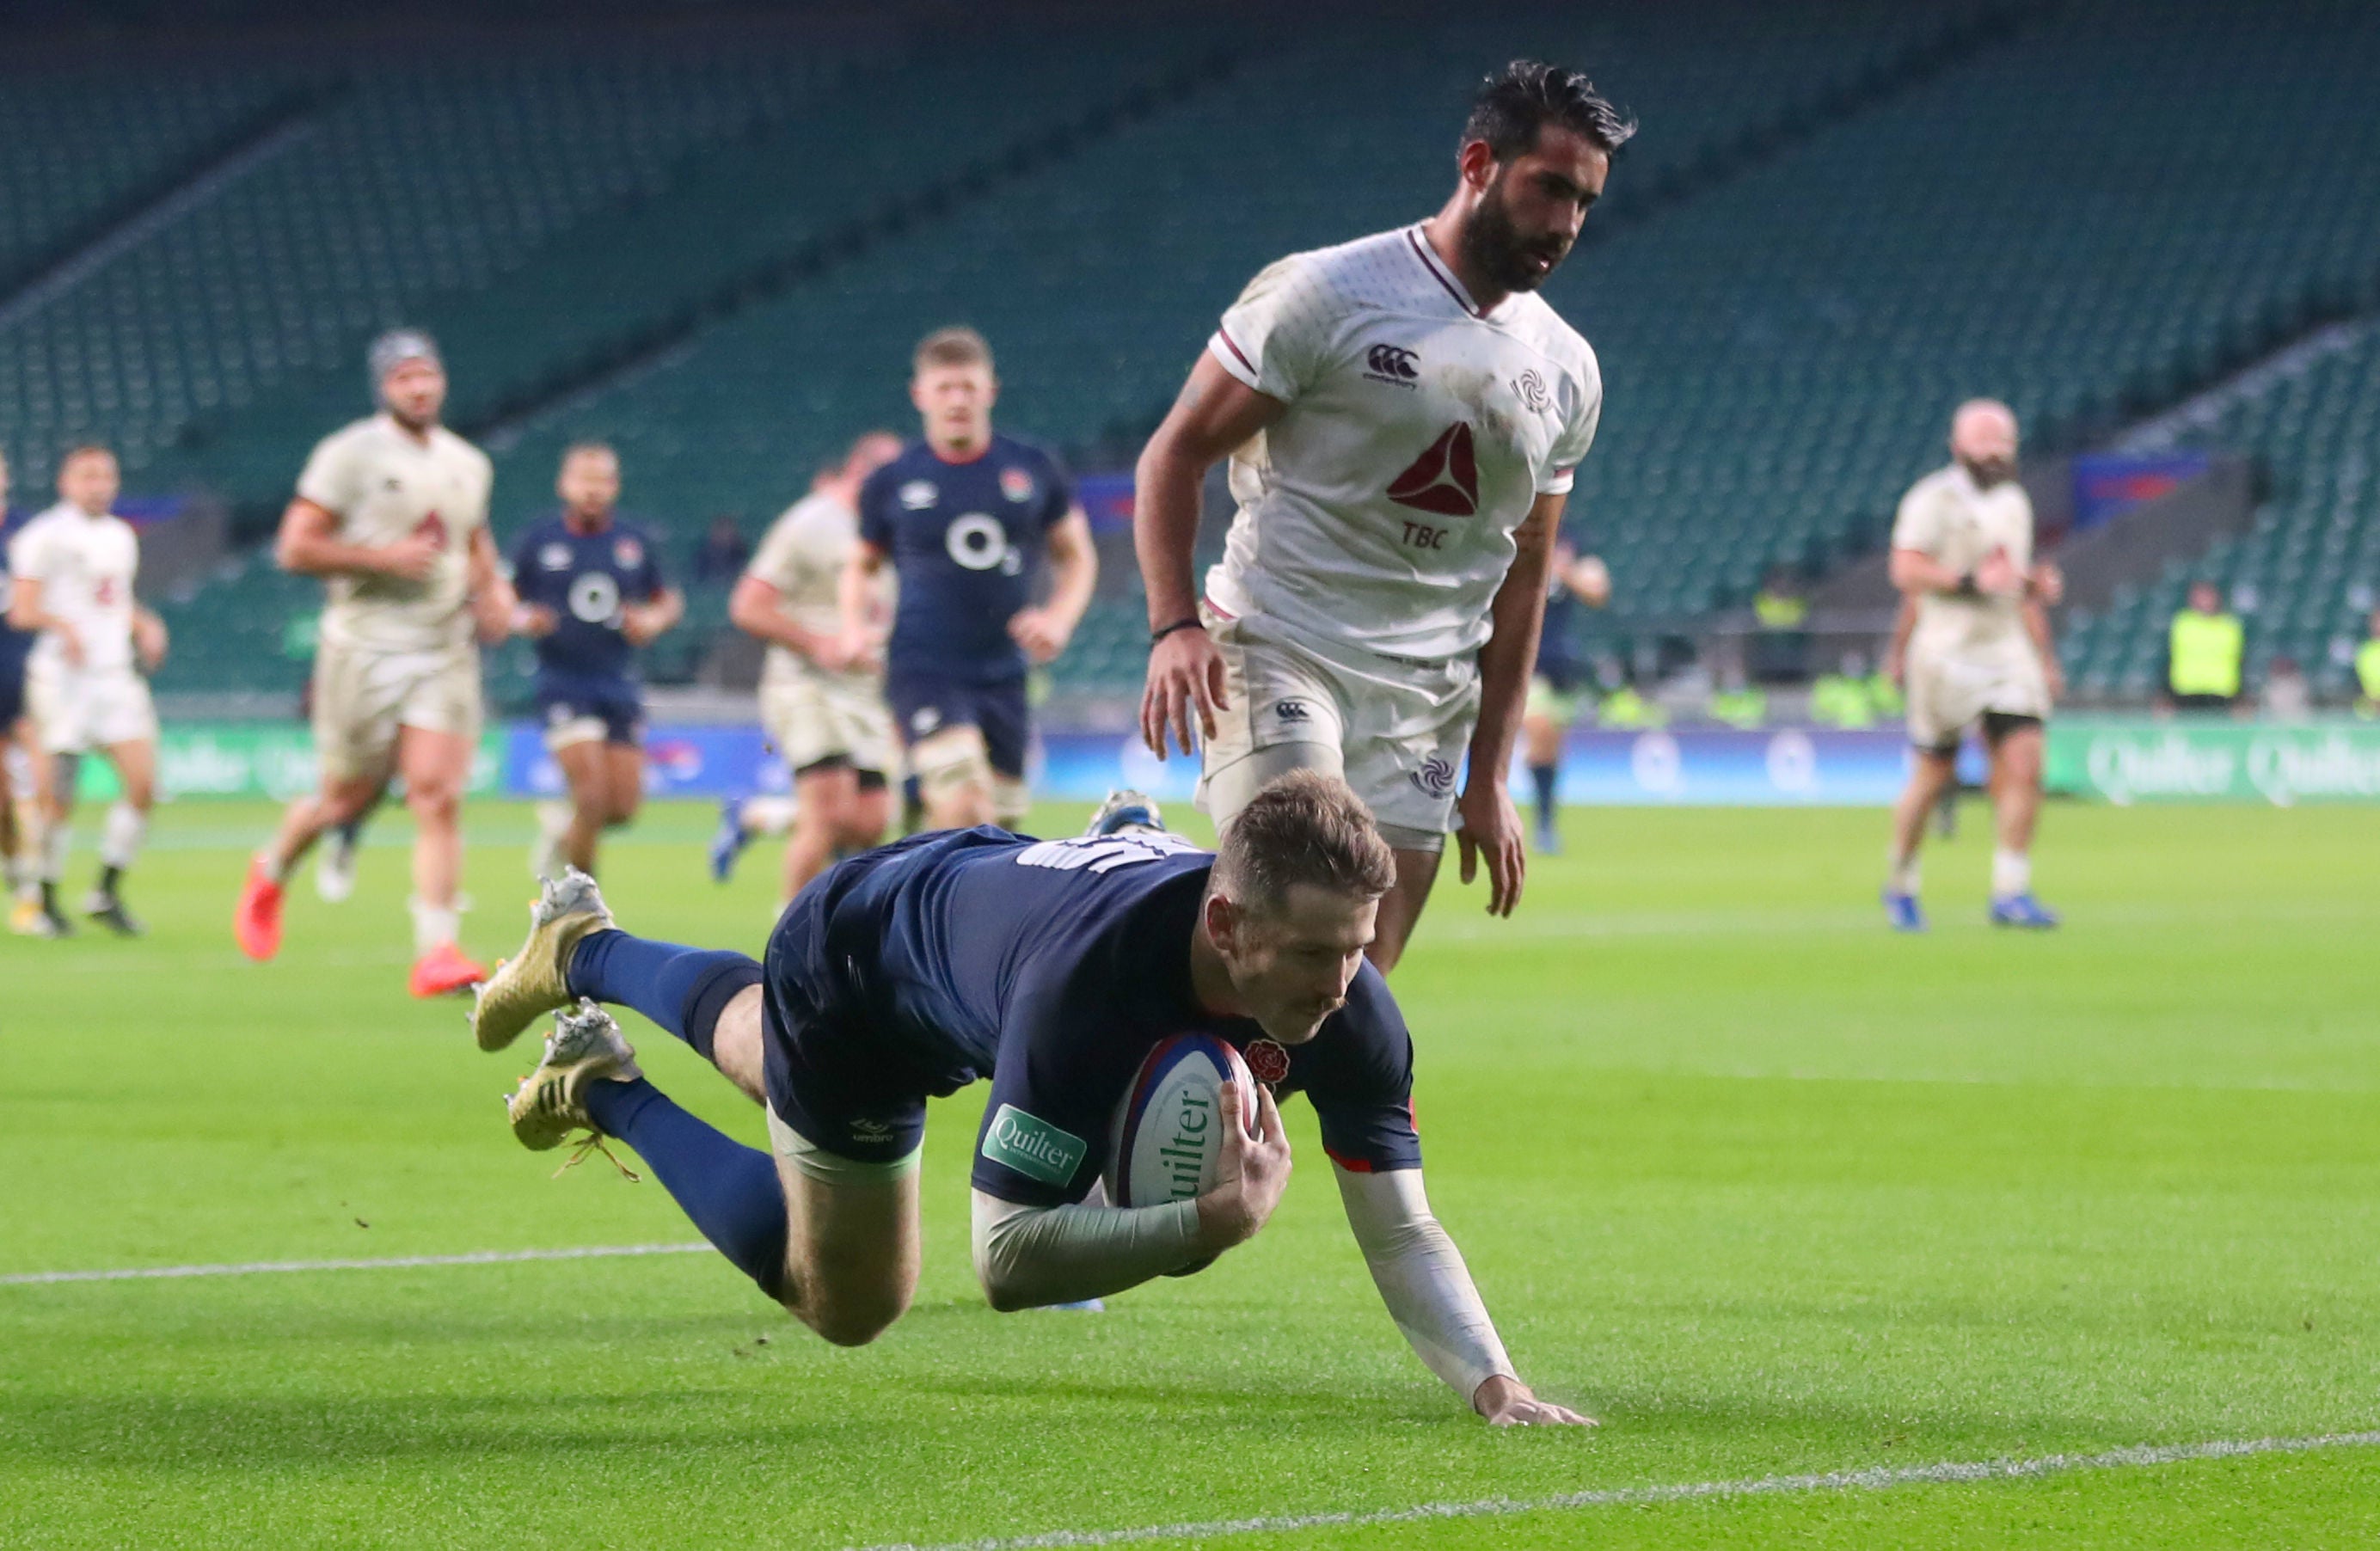 Daly finished the try of the match to score England’s fourth